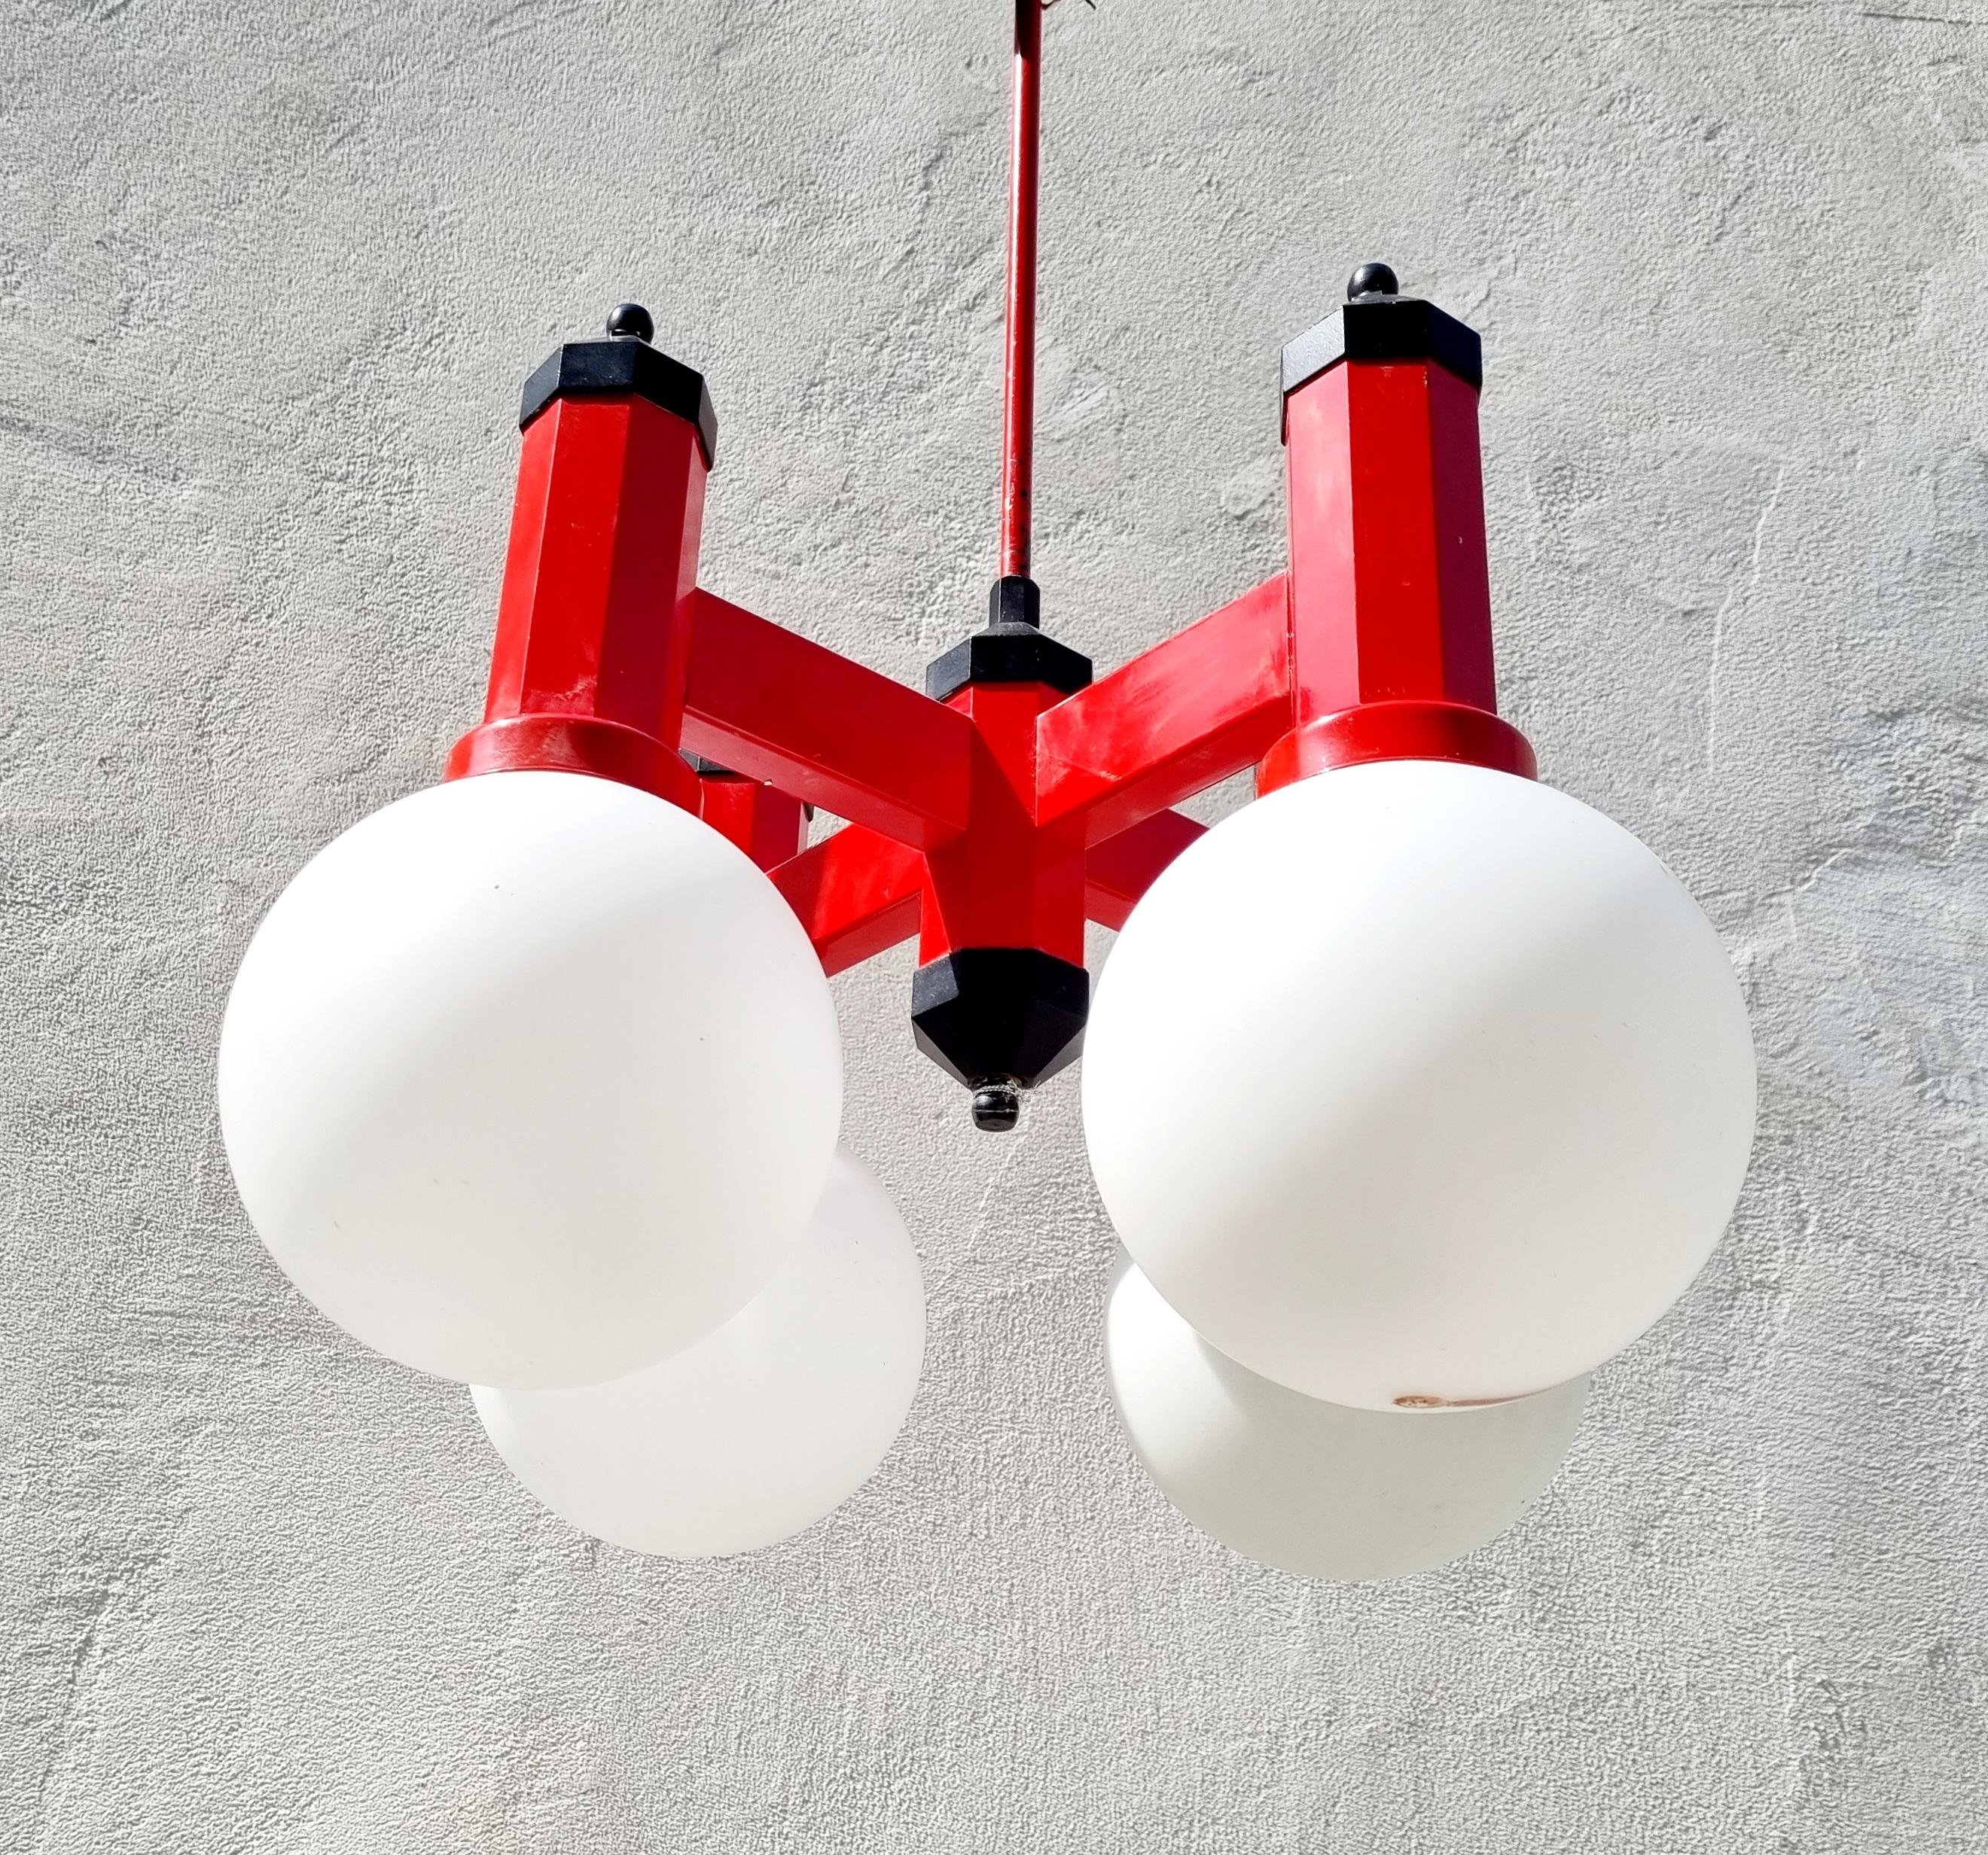 Mid Century Modern four arms Chandelier from '70s was made in Yugoslavia.
It is made of metal red base and four milk glass shades.
Lamp works perfectly. It is very unique and stylish. Very retro! 
Classice socialist design from the 70s